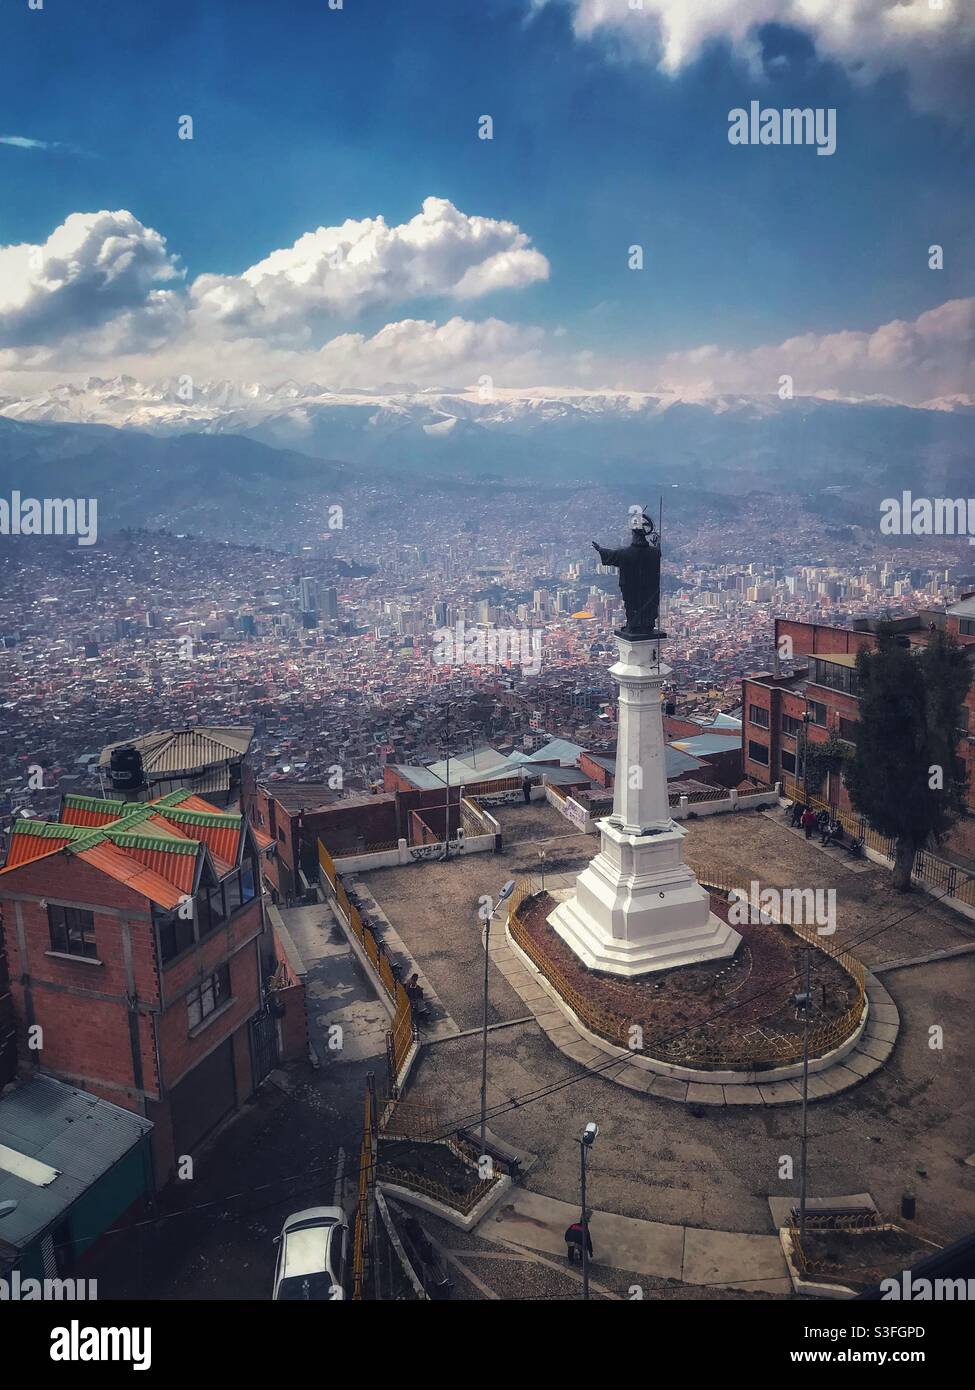 A religious Statue looks over La Paz, Bolivia from the neighboring city of El Alto Stock Photo